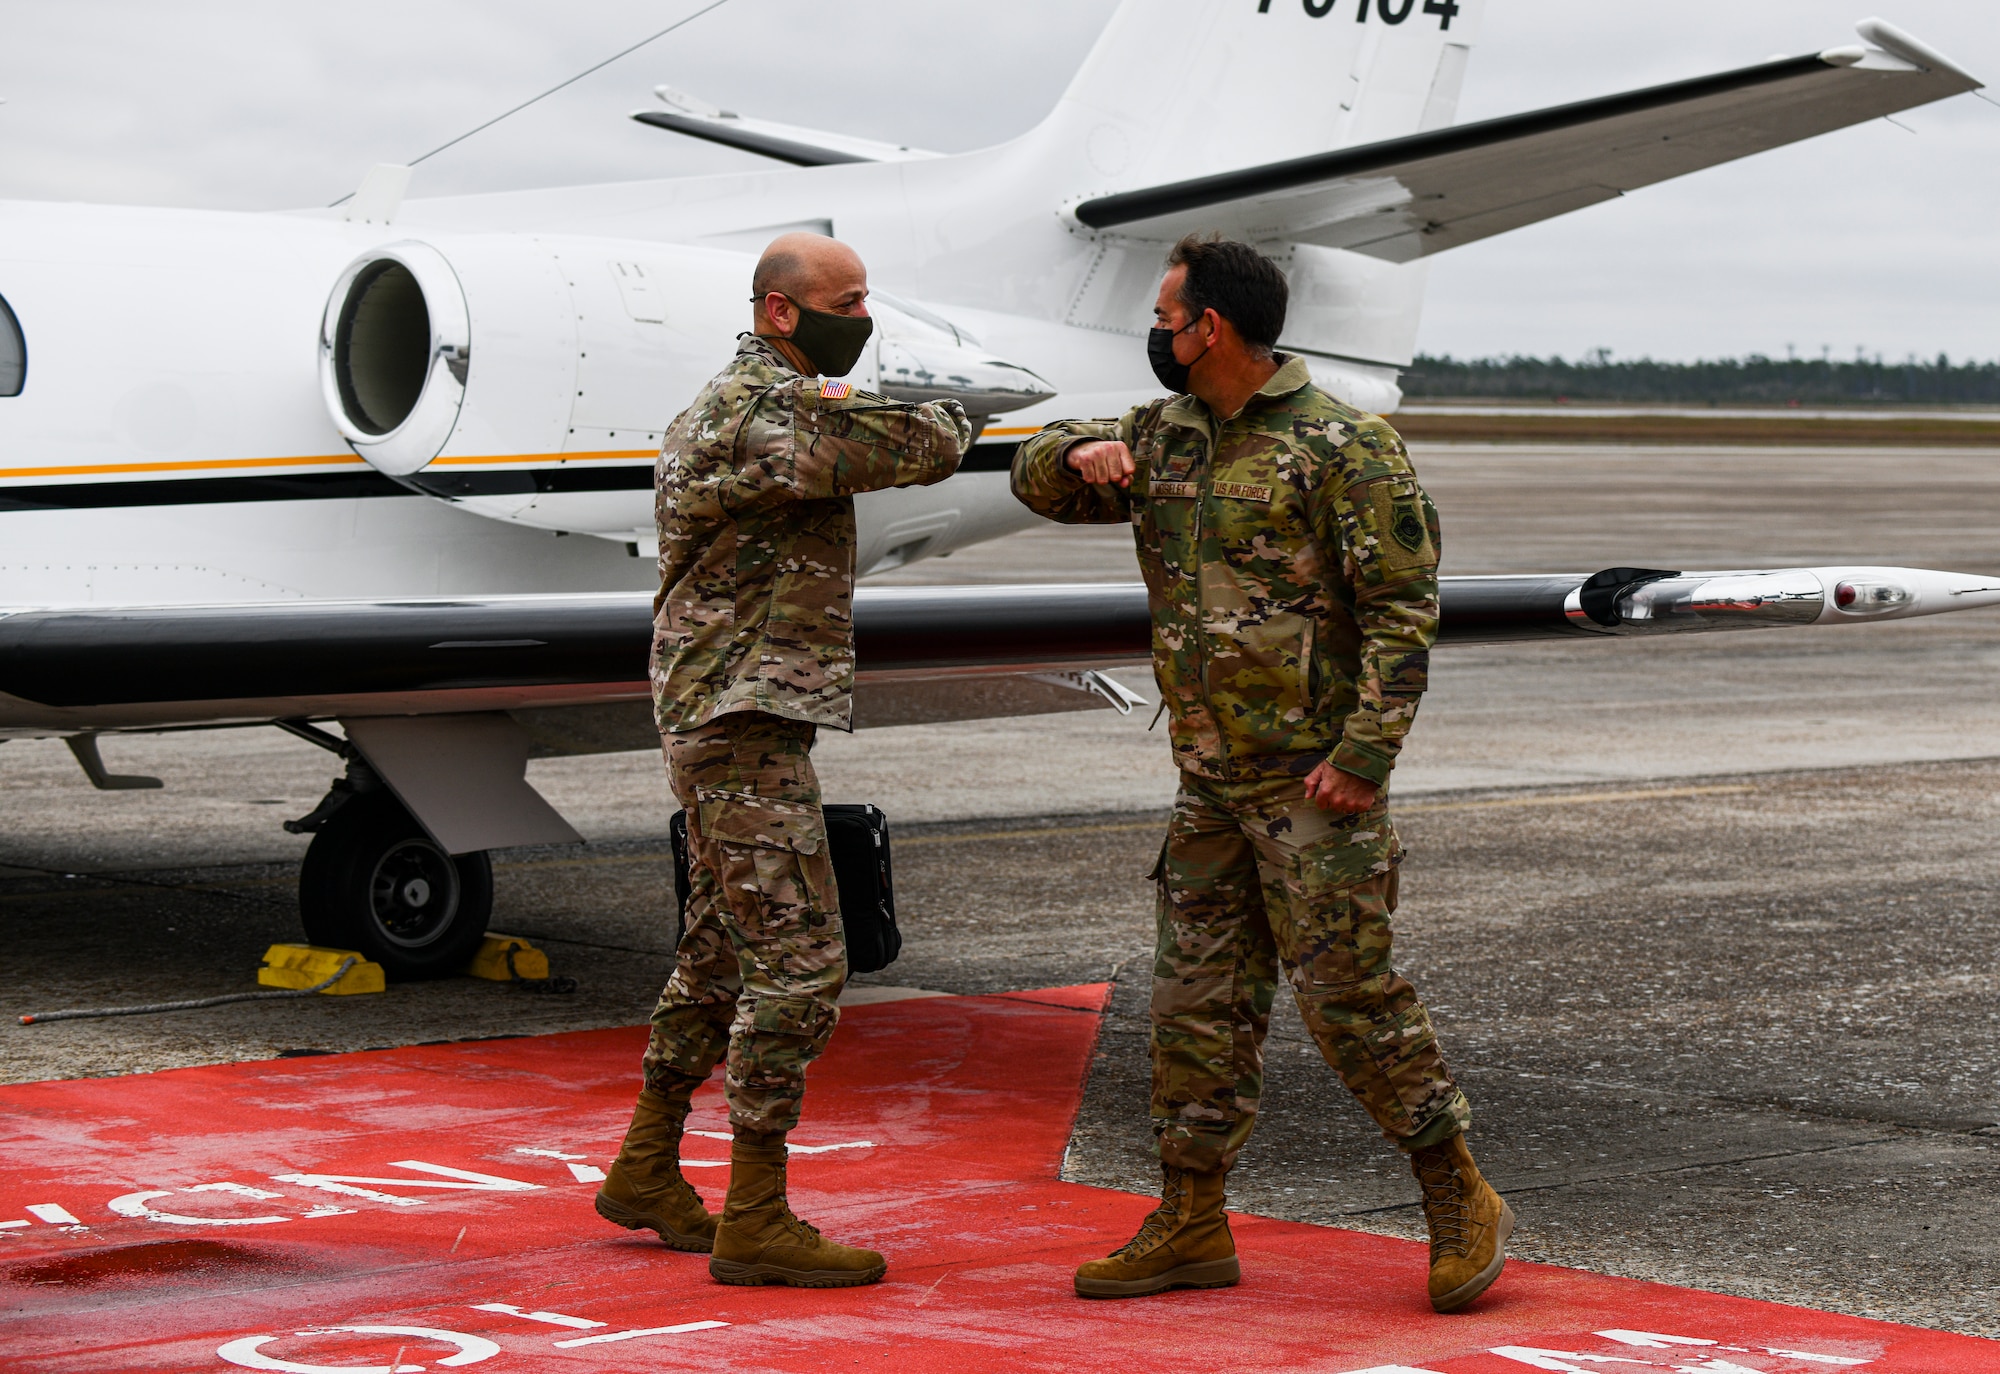 U.S. Army Lt. Gen. Scott A. Spellmon, Commanding General of the U.S. Army Corps of Engineers, greets U.S. Air Force Col. Greg Moseley, 325th Fighter Wing commander, at Tyndall Air Force Base, Florida, March 2, 2021. Spellmon visited Tyndall to engage with leadership and gain a better understanding of strategic objectives. (U.S. Air Force photo by Staff Sgt. Stefan Alvarez)